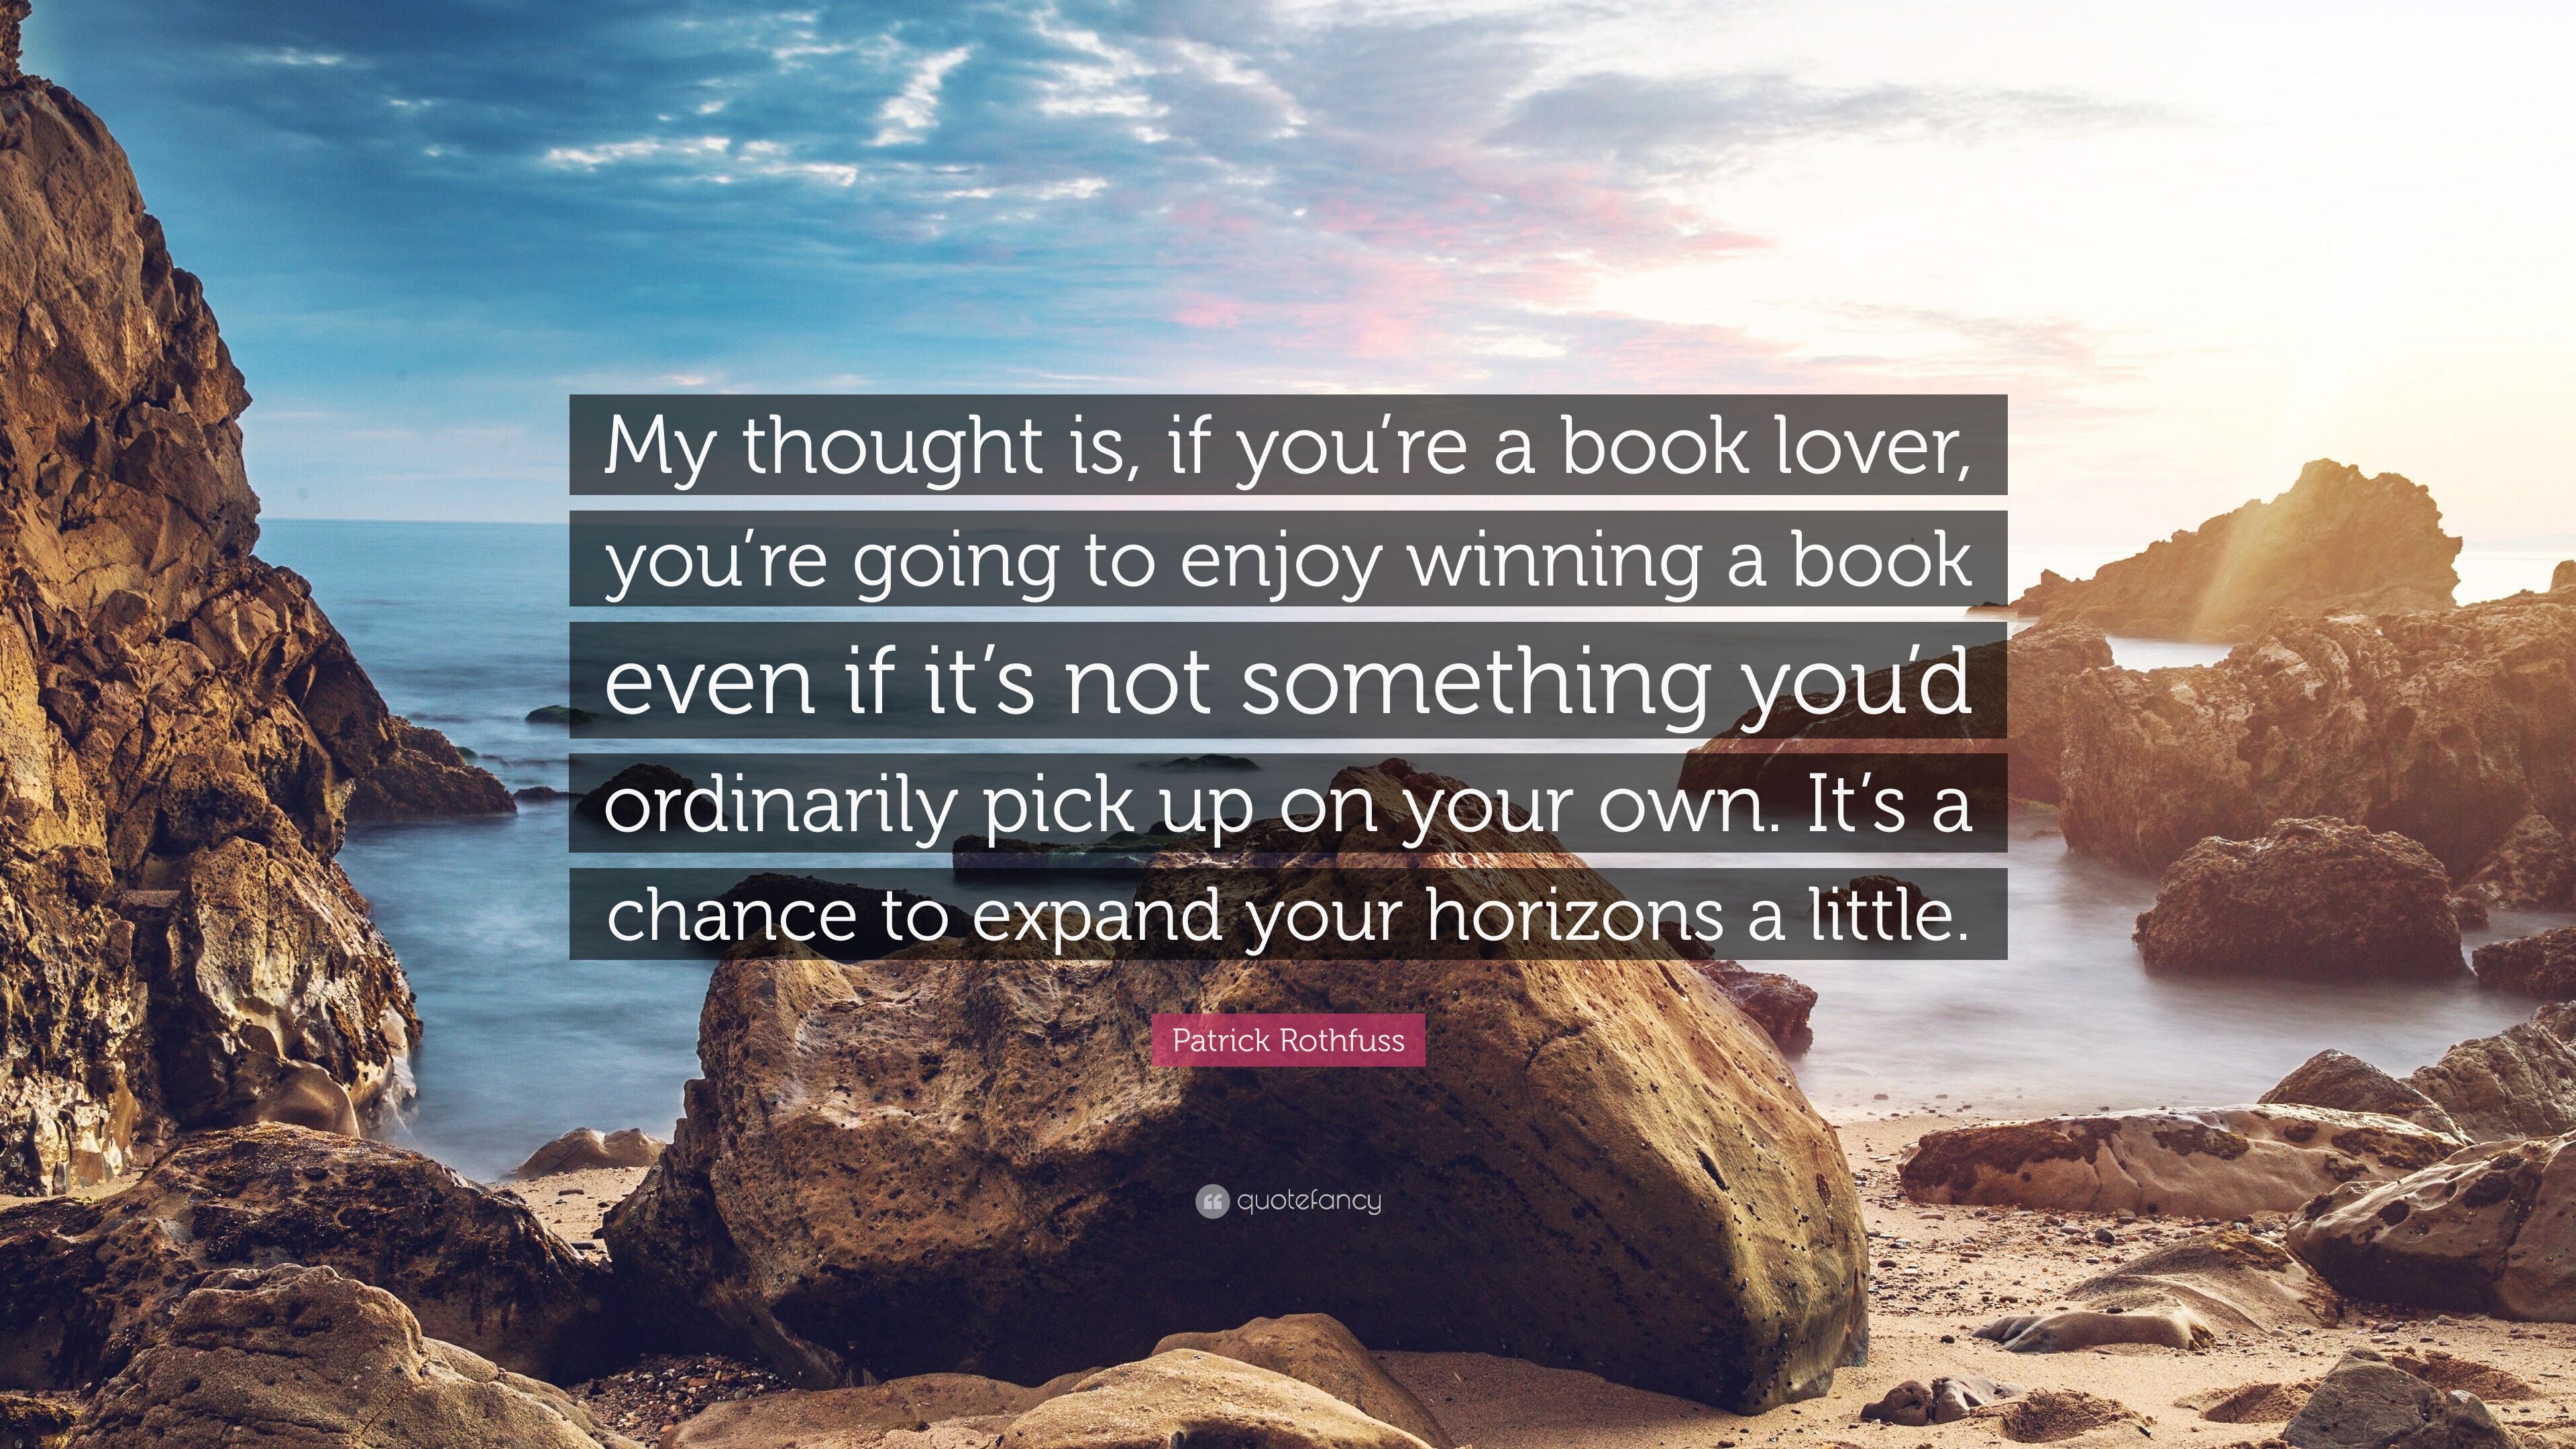 Patrick Rothfuss Quote: “My thought is, if you're a book lover